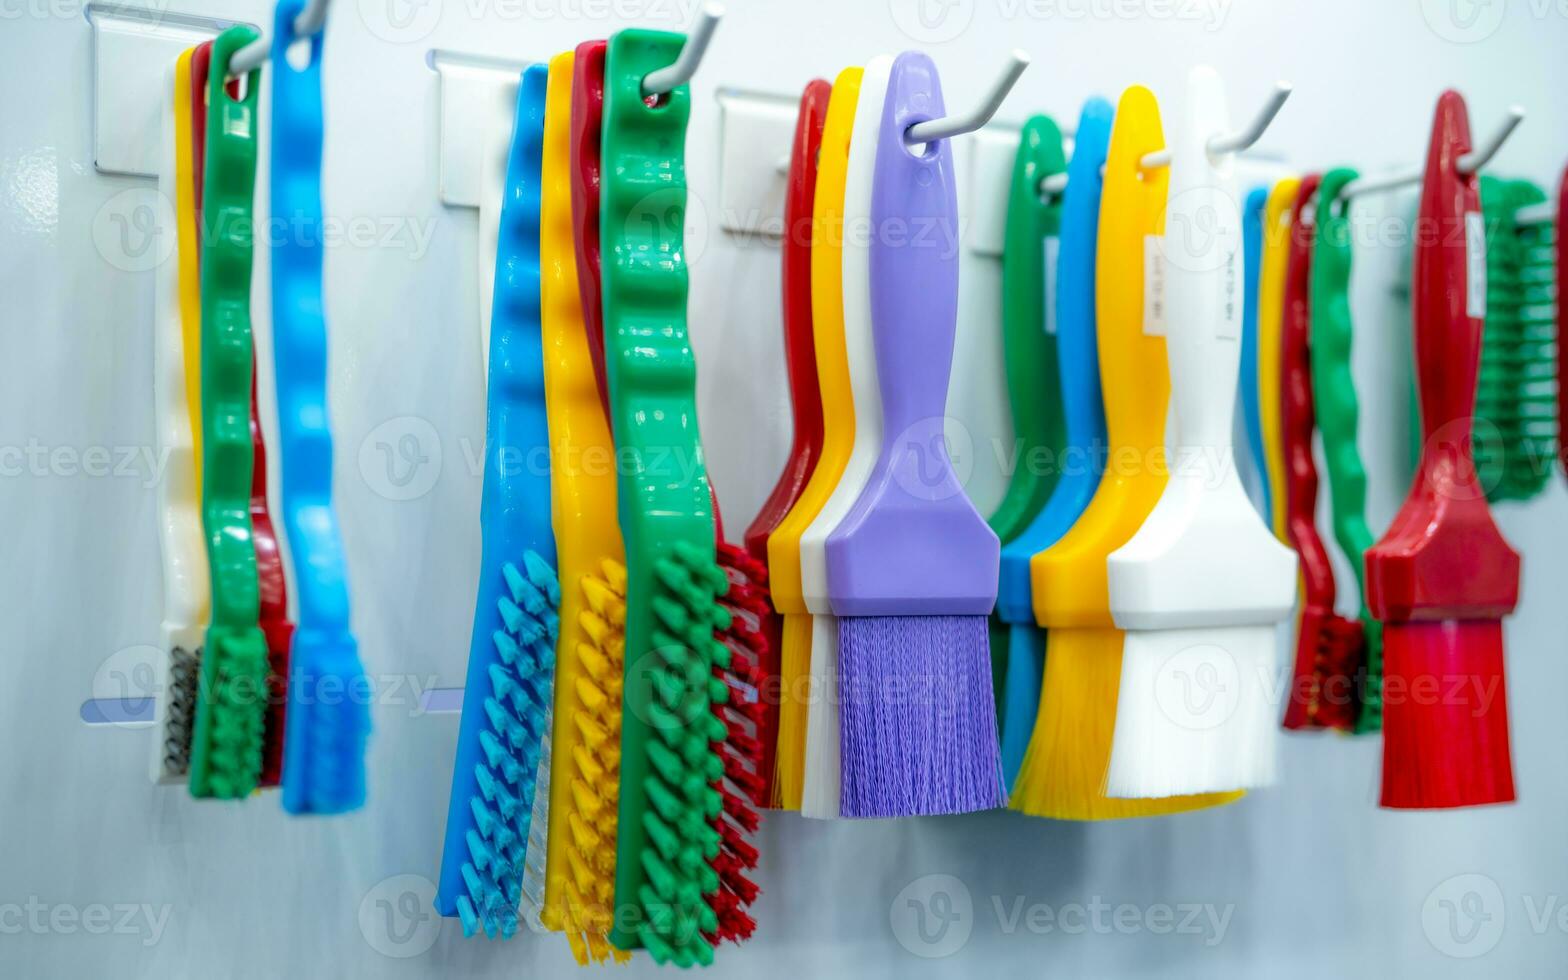 Brushes hang on shelf. Color coded hygiene glazing brushes and detail brushes for food processing and manufacturing. Cleaning tool for food safety in food and beverage industry. Durable cleaning brush photo